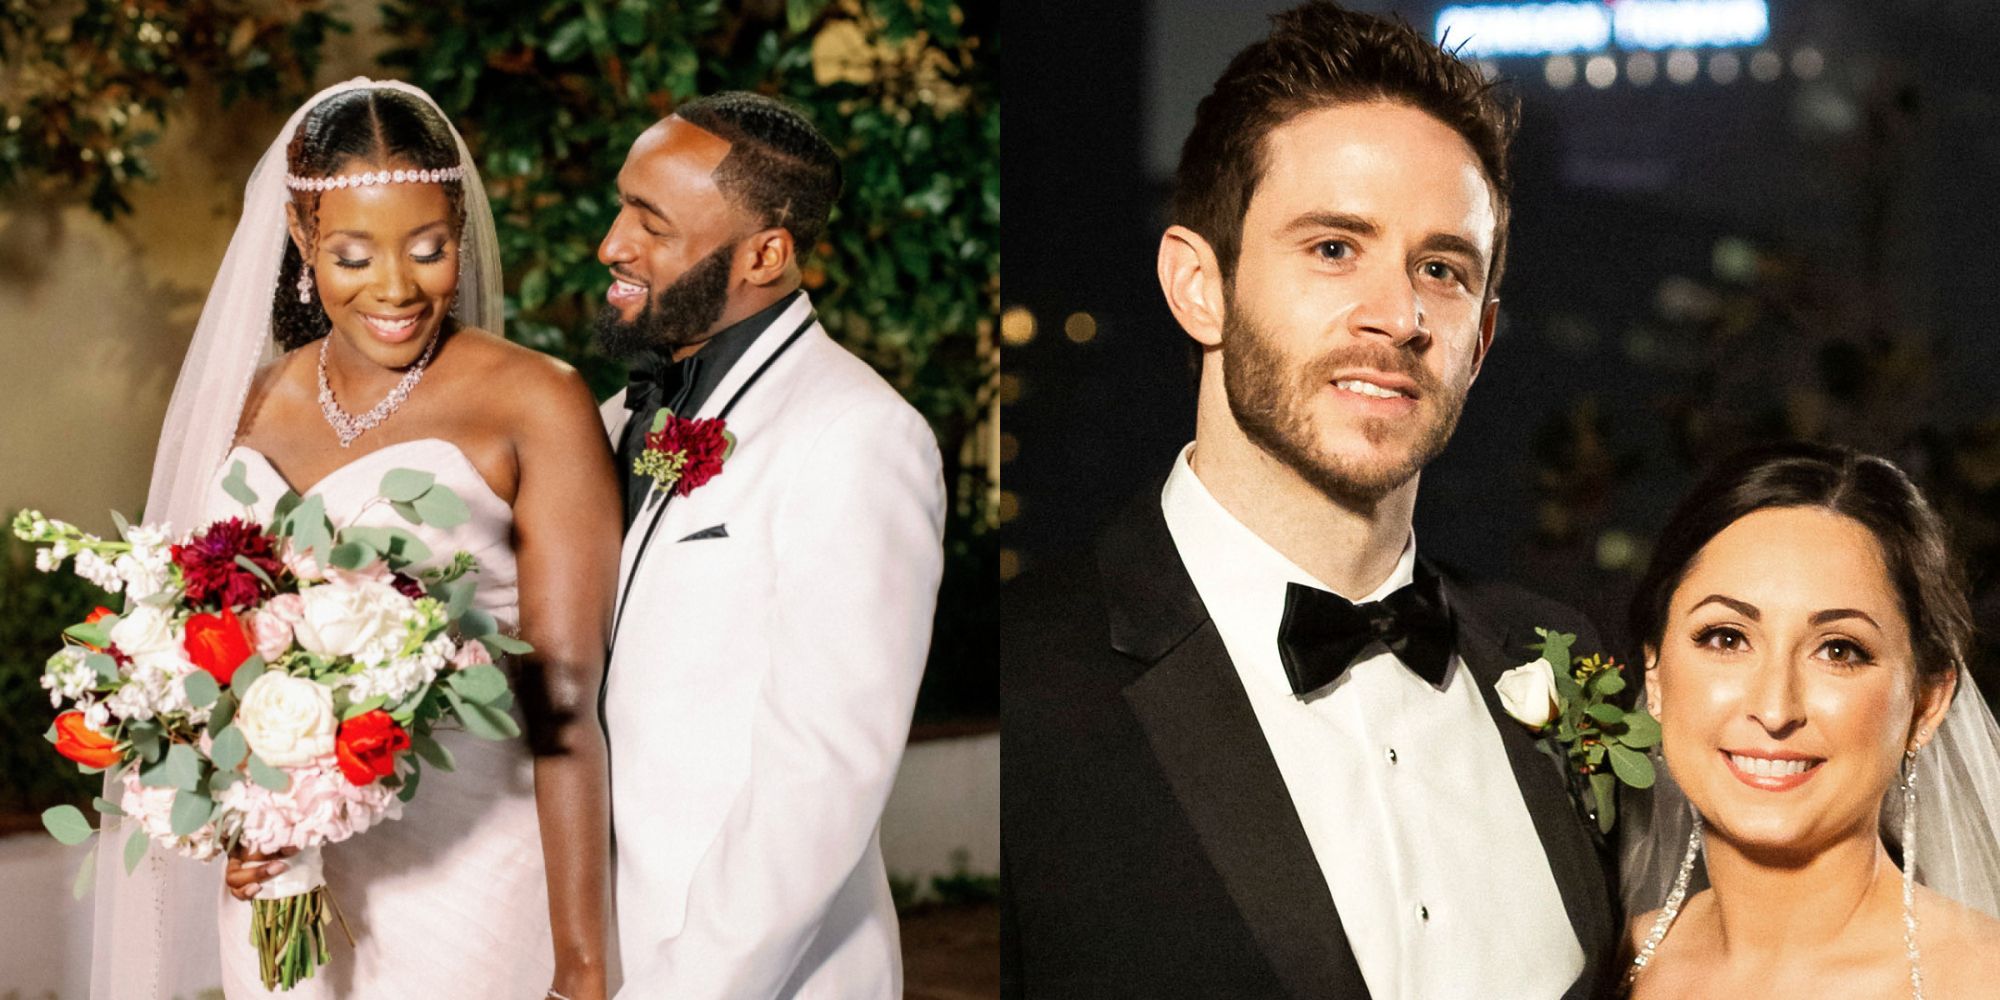 Married At First Sight Season 11: Where Are They Now?